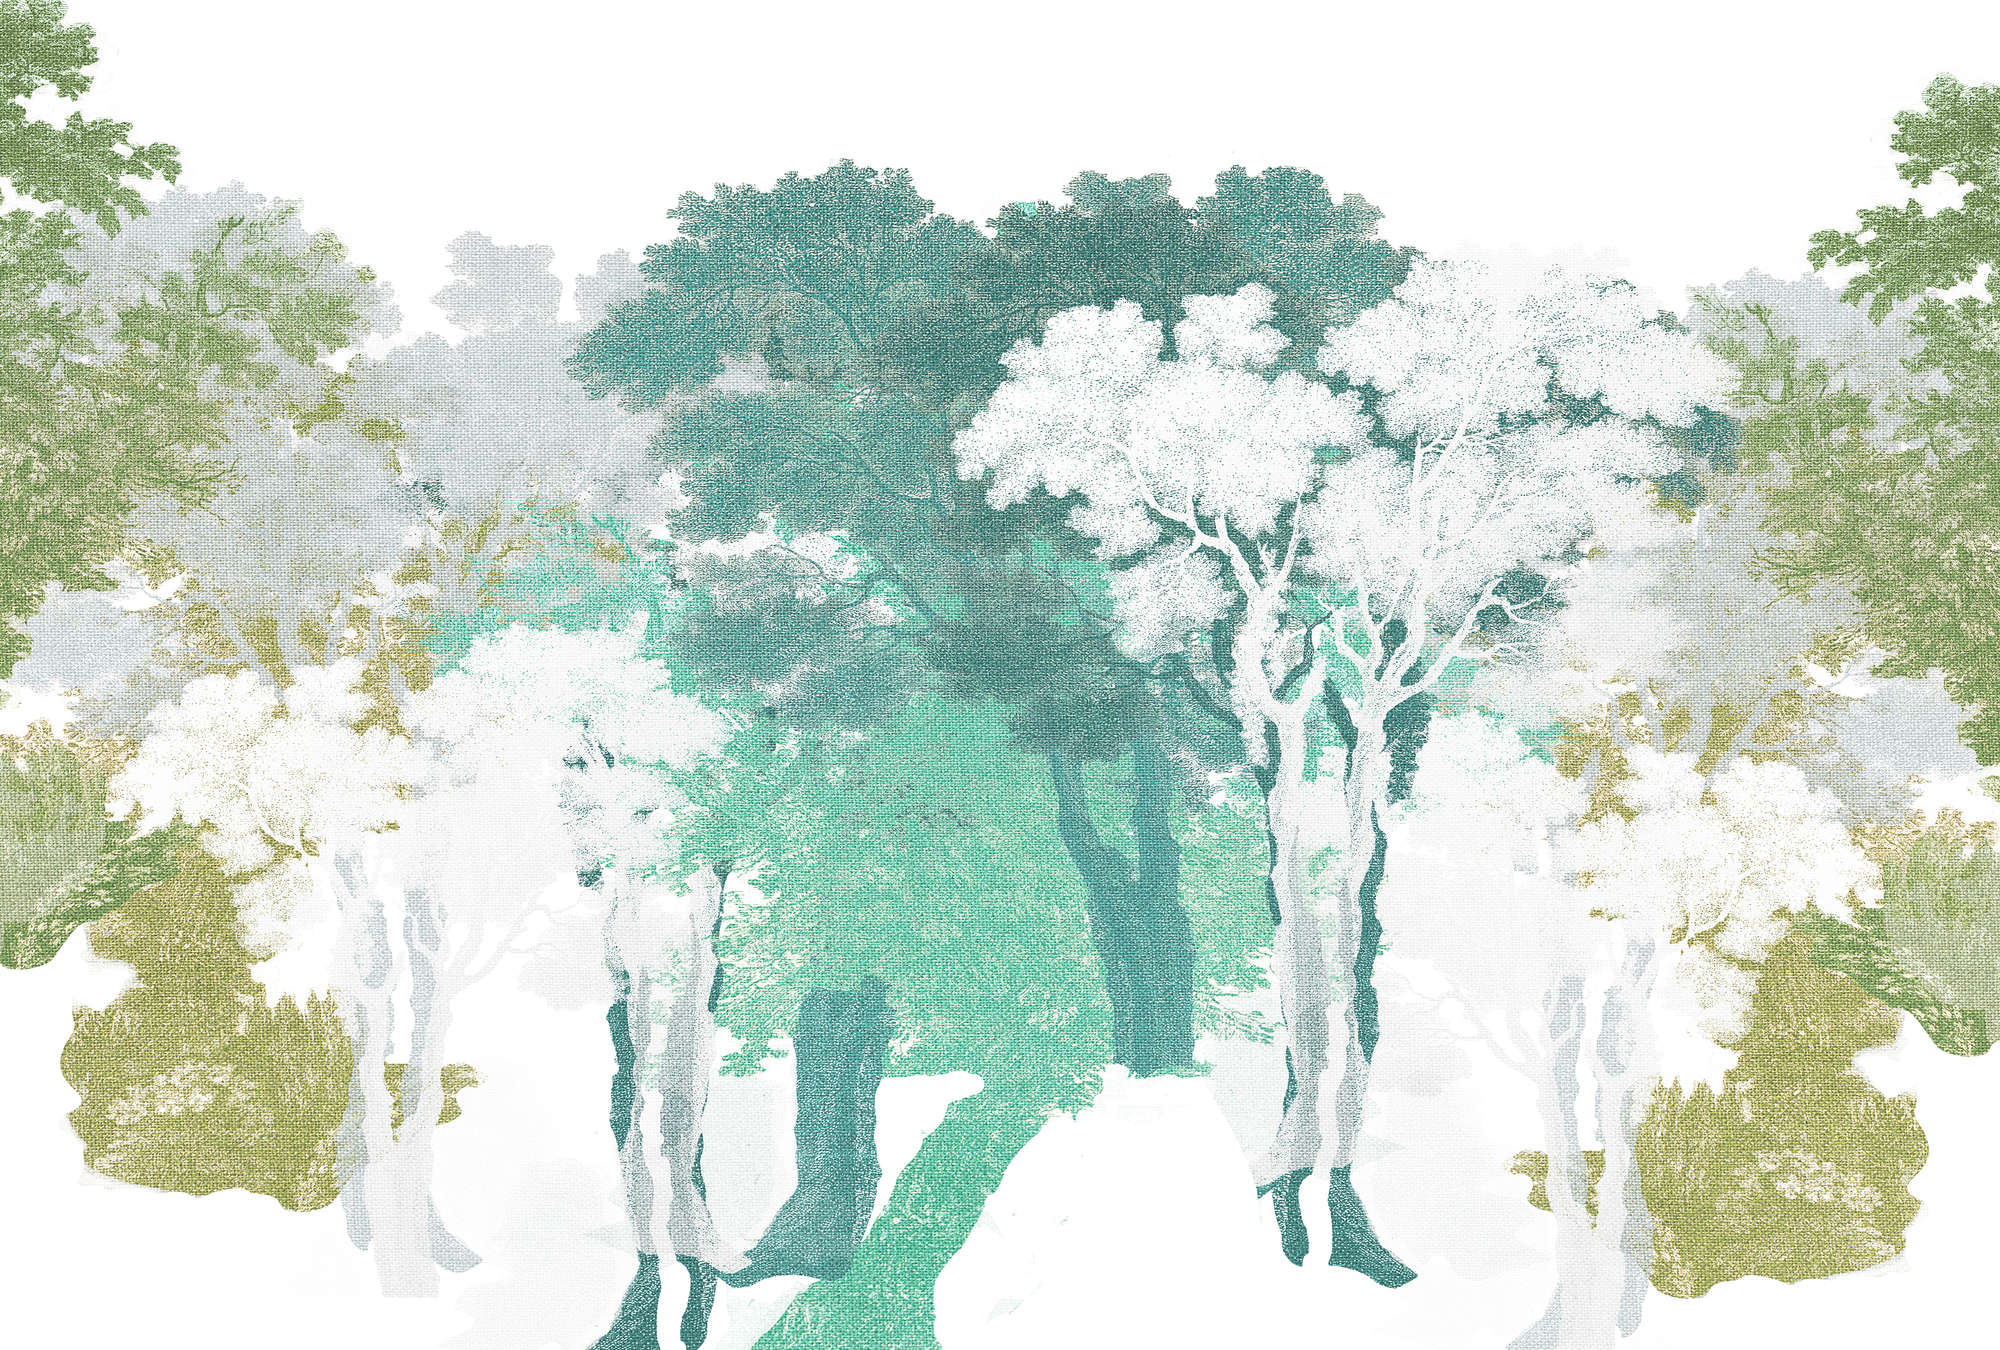             Photo wallpaper with tree motif, forest & linen look - green, white, grey
        